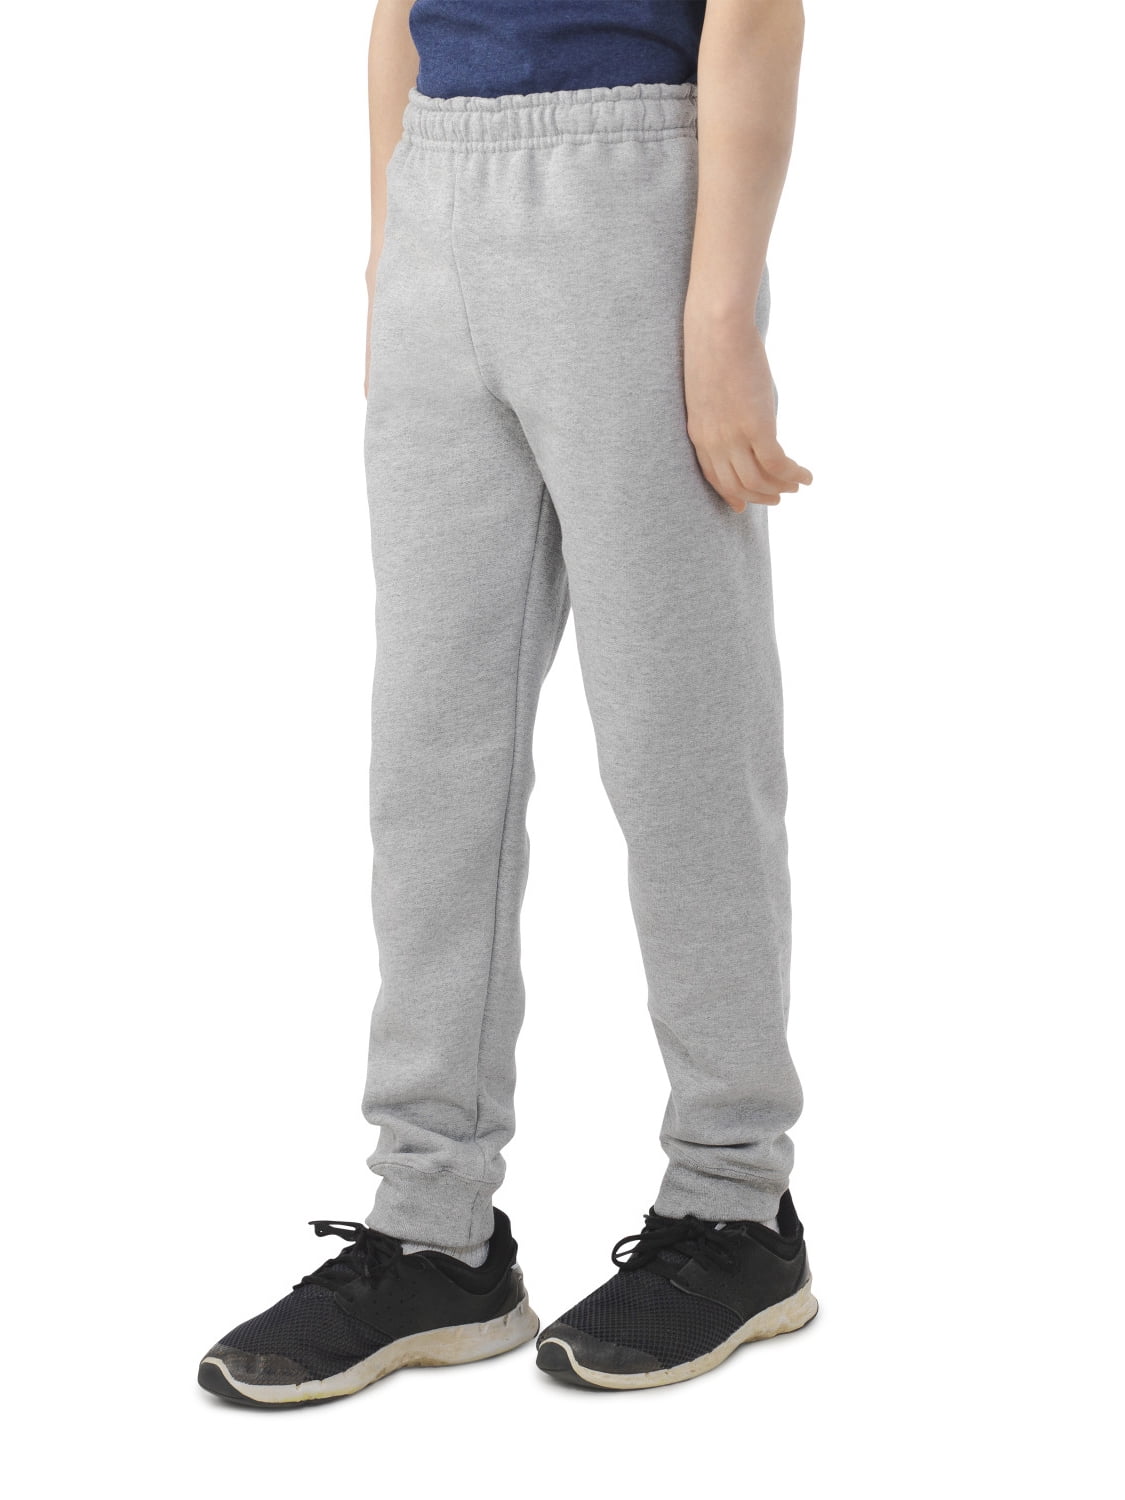 Fruit of the Loom New Better Fit Kids Jogging Pants with Side Pockets 